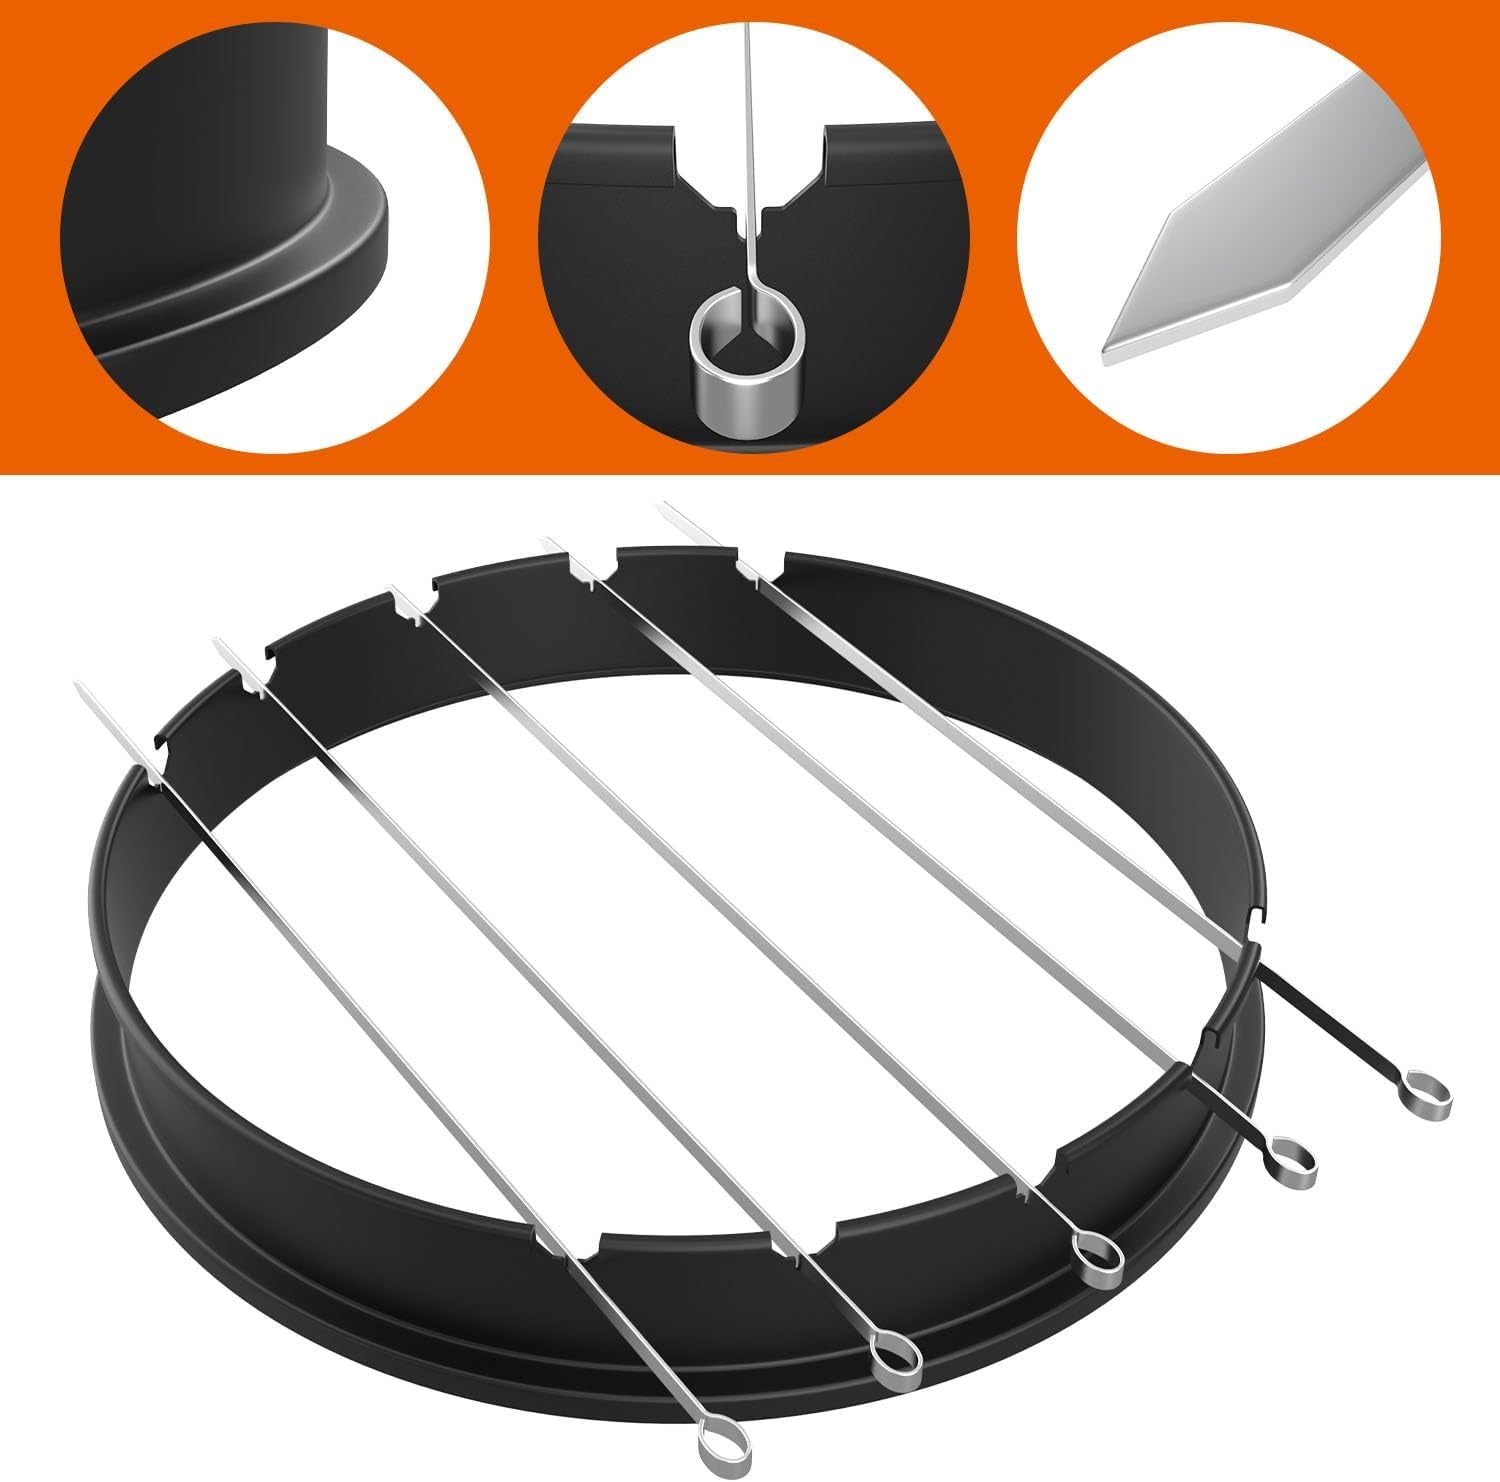 Rotisserie Ring with Kabob Skewer Kits for Weber 18 Inch Charcoal Kettle Grills, Grill Rotisserie for Solo Stove Bonfire and Other Similar Charcoal Grills